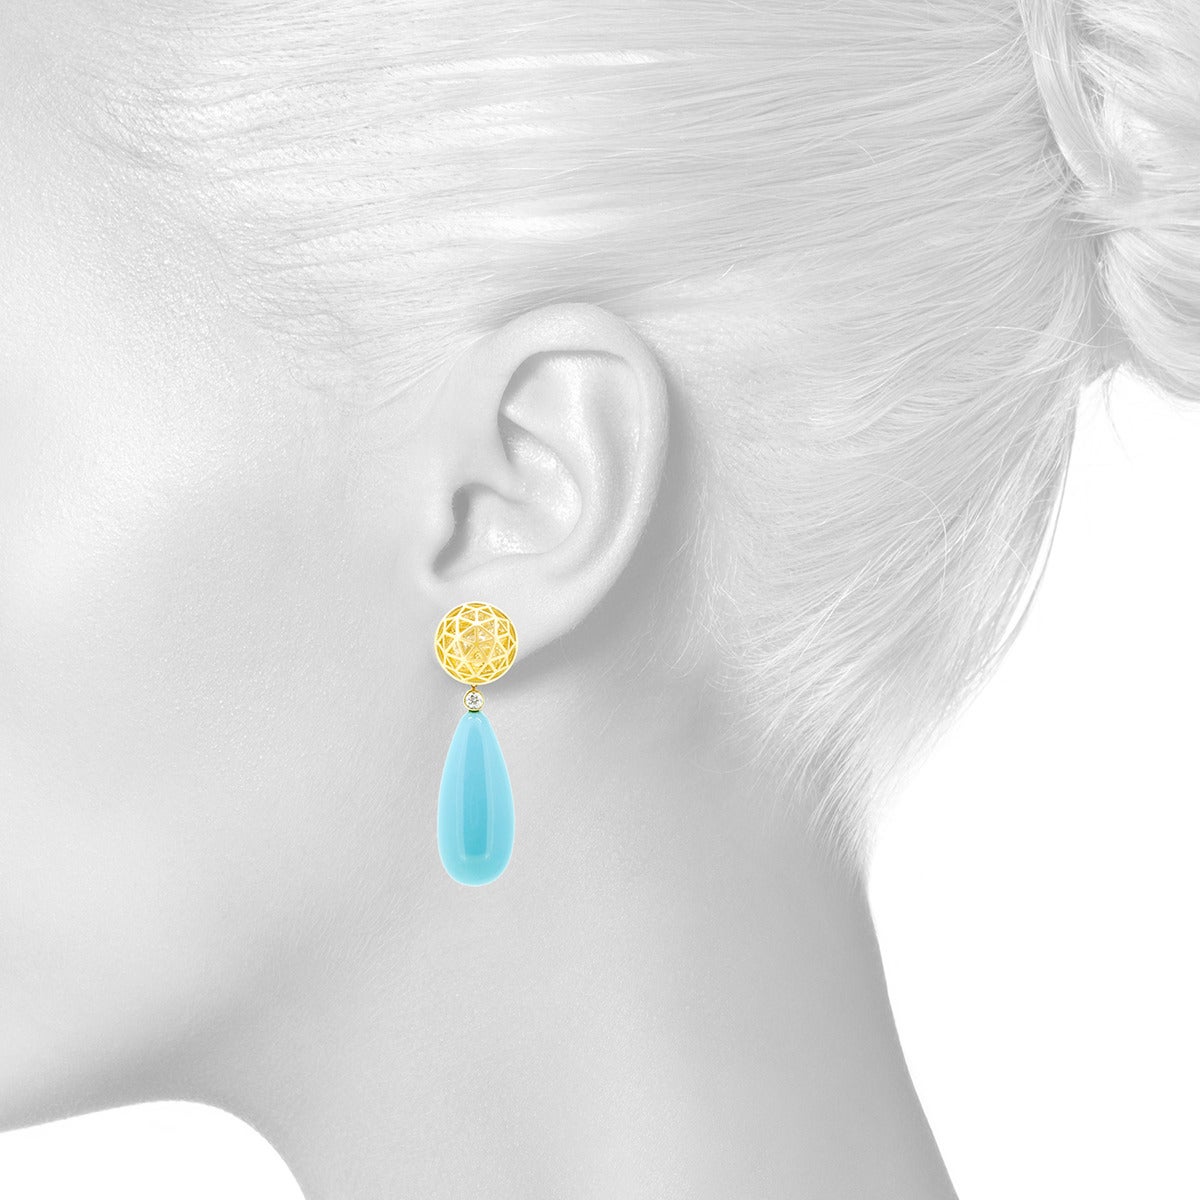 From the Wired Collection, drop earrings in 18k yellow gold with 6 cts of loose yellow sapphires, bezel-set white diamond spacers (0.07 ct), and 37 ct Sleeping Beauty turquoise teardrops. Satin finish with polished highlights. Geodesic pattern. On